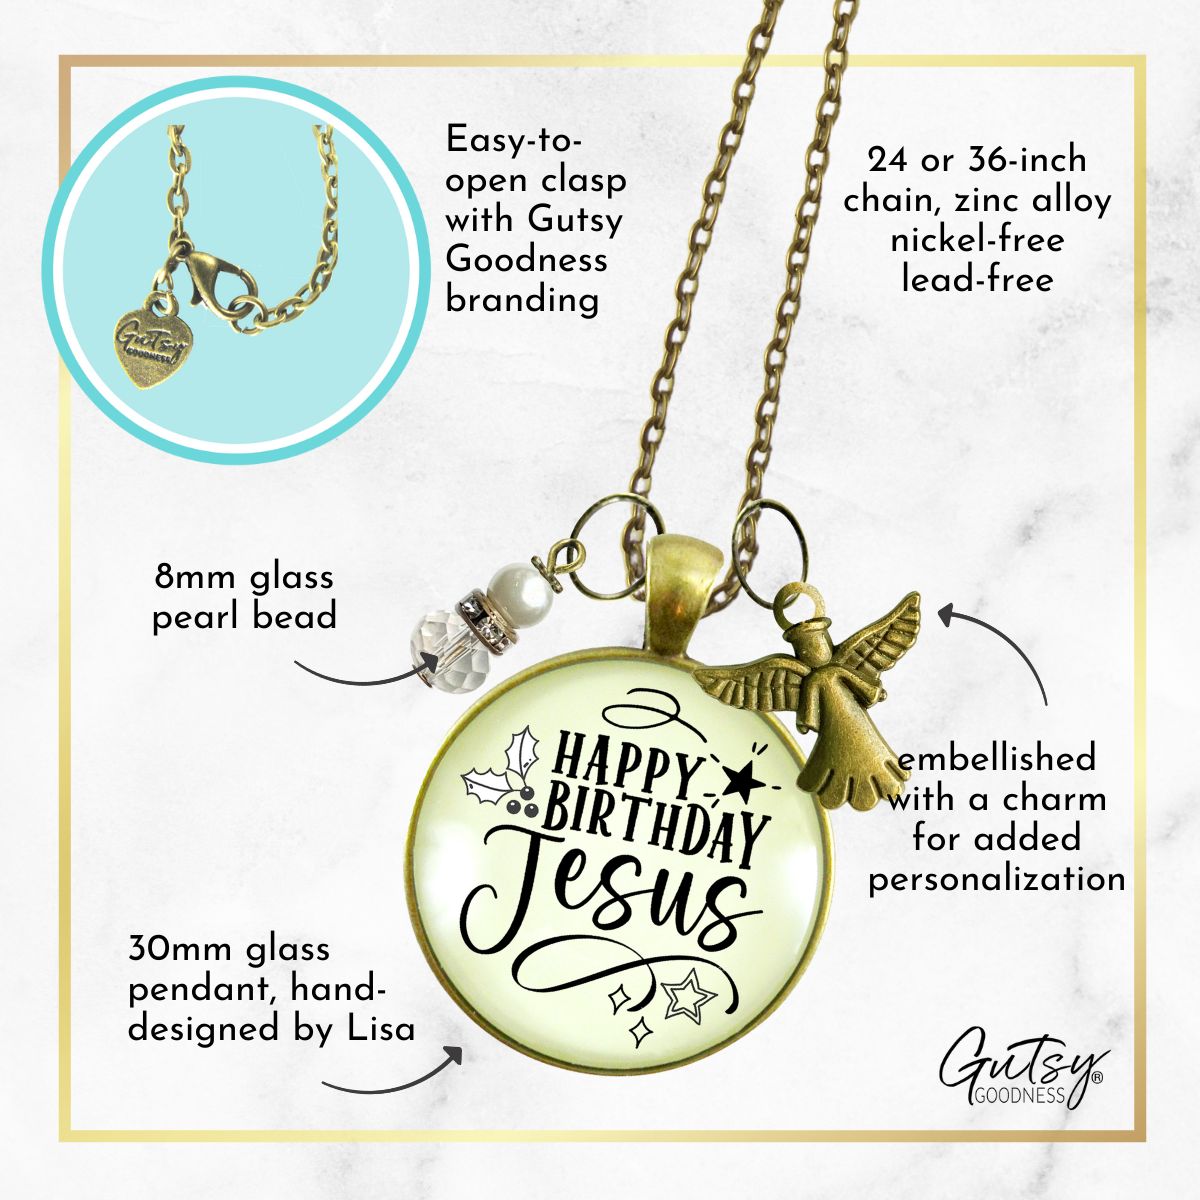 Happy Birthday Gift Necklace For Women Merry Christmas Faith Jewelry Charms Handmade Holiday Pendant  Necklace - Gutsy Goodness Handmade Jewelry